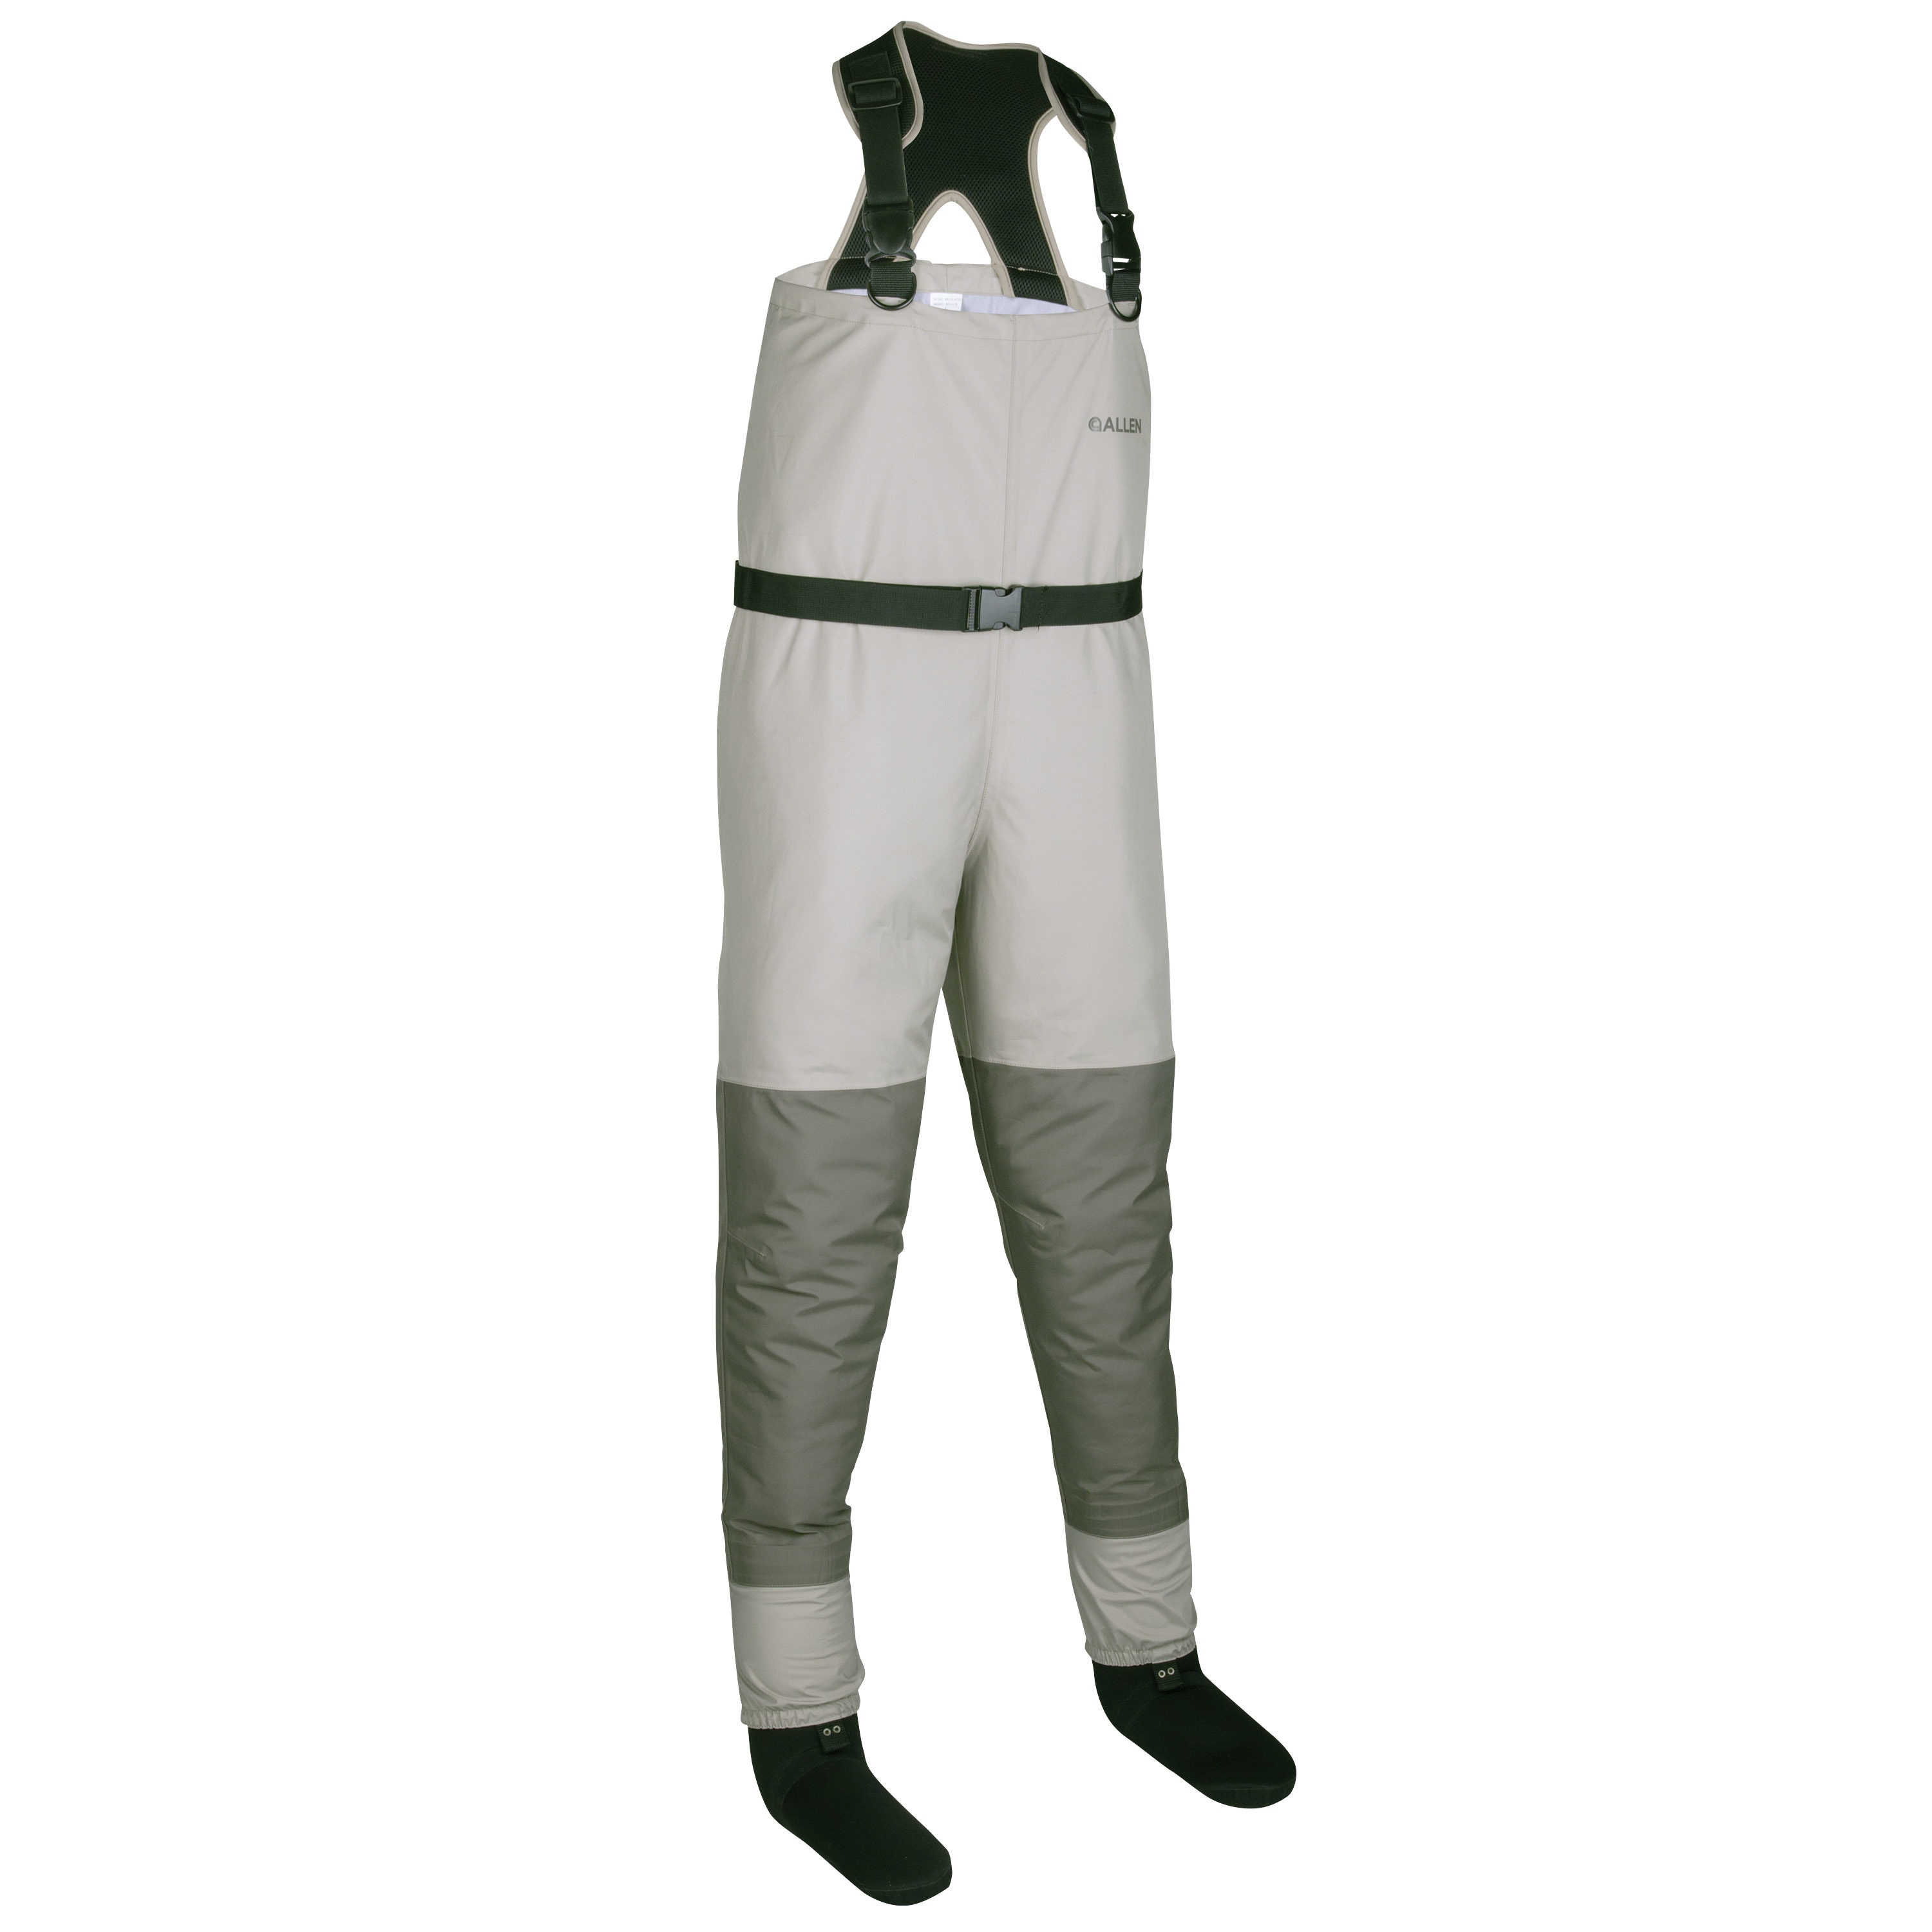 Redington Clark Fork Fly Fishing Fast Wick Mesh Vest with Pockets, L/XL (2  Pack) in the Fishing Gear & Apparel department at